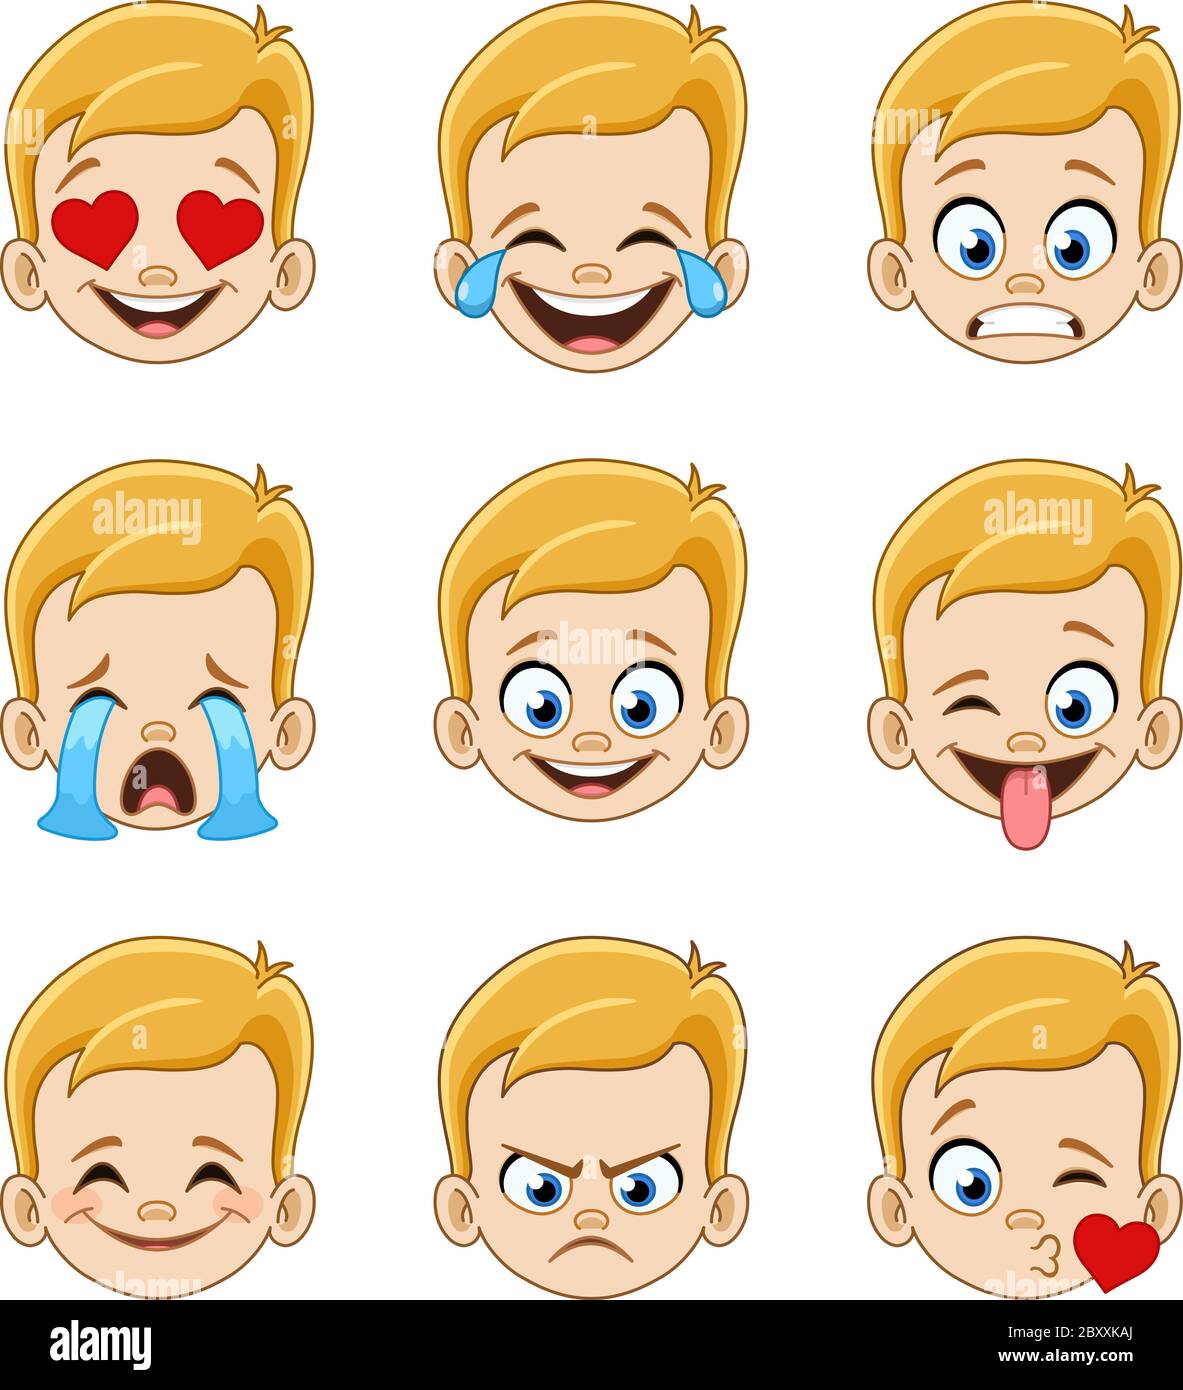 Emoji face expressions collection of a young blond boy with blue eyes Stock Vector